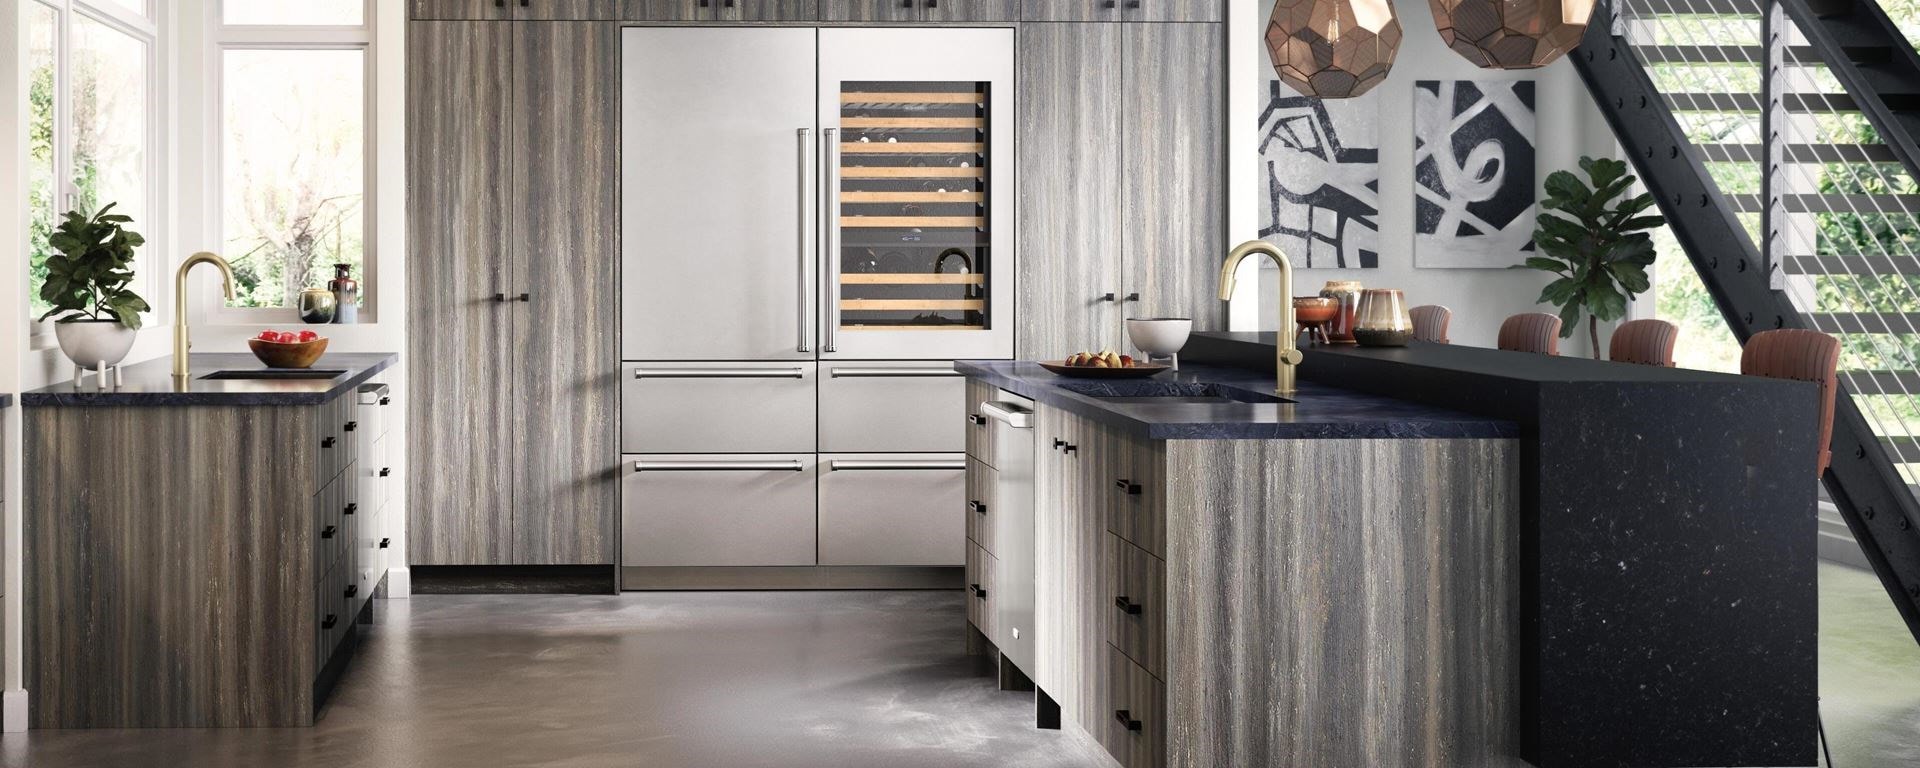 Cove dishwasher with custom panels blended into stunning kitchen design